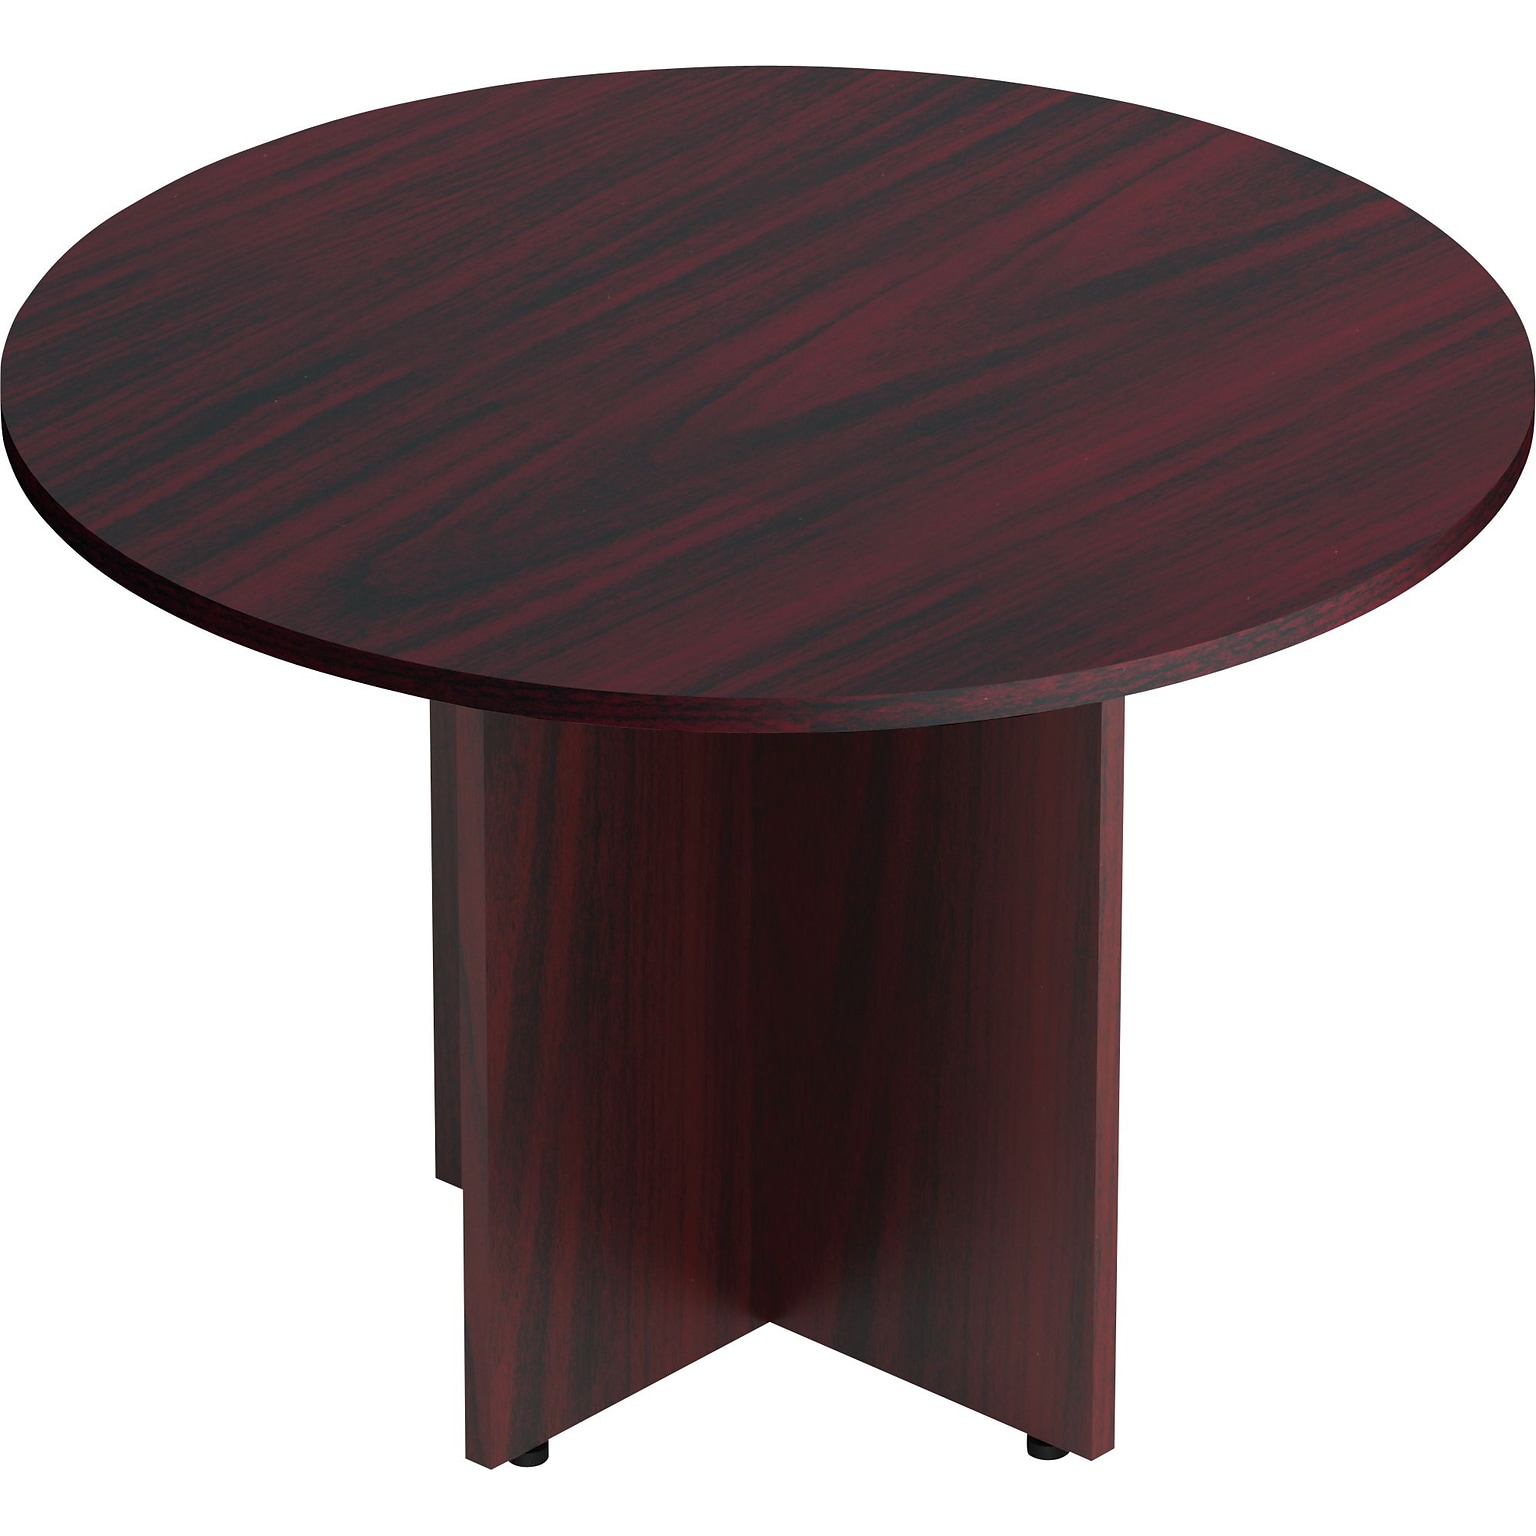 Offices to Go 42 Dia. Superior Laminate Round Conference Table, American Mahogany (TDSL42RAML)